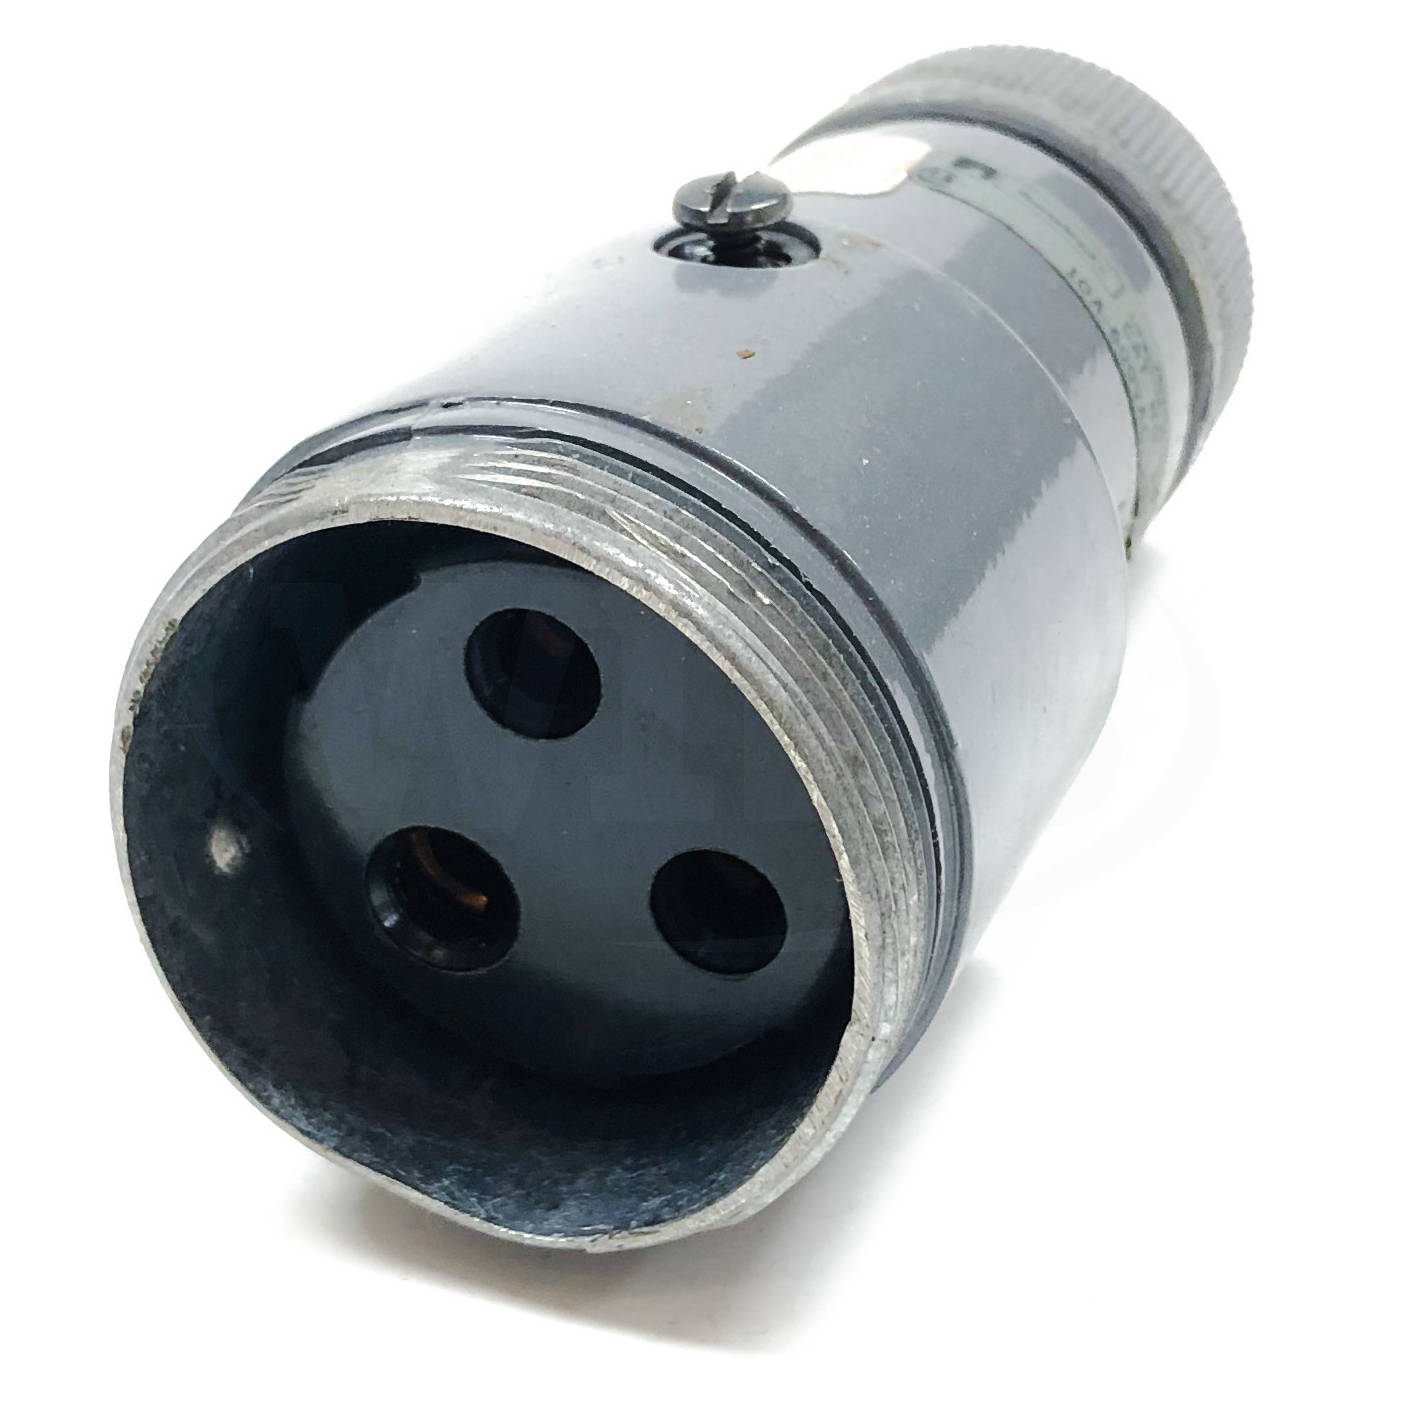 3913 Russellstoll Connector, 2-Wire, 3-Pole 4